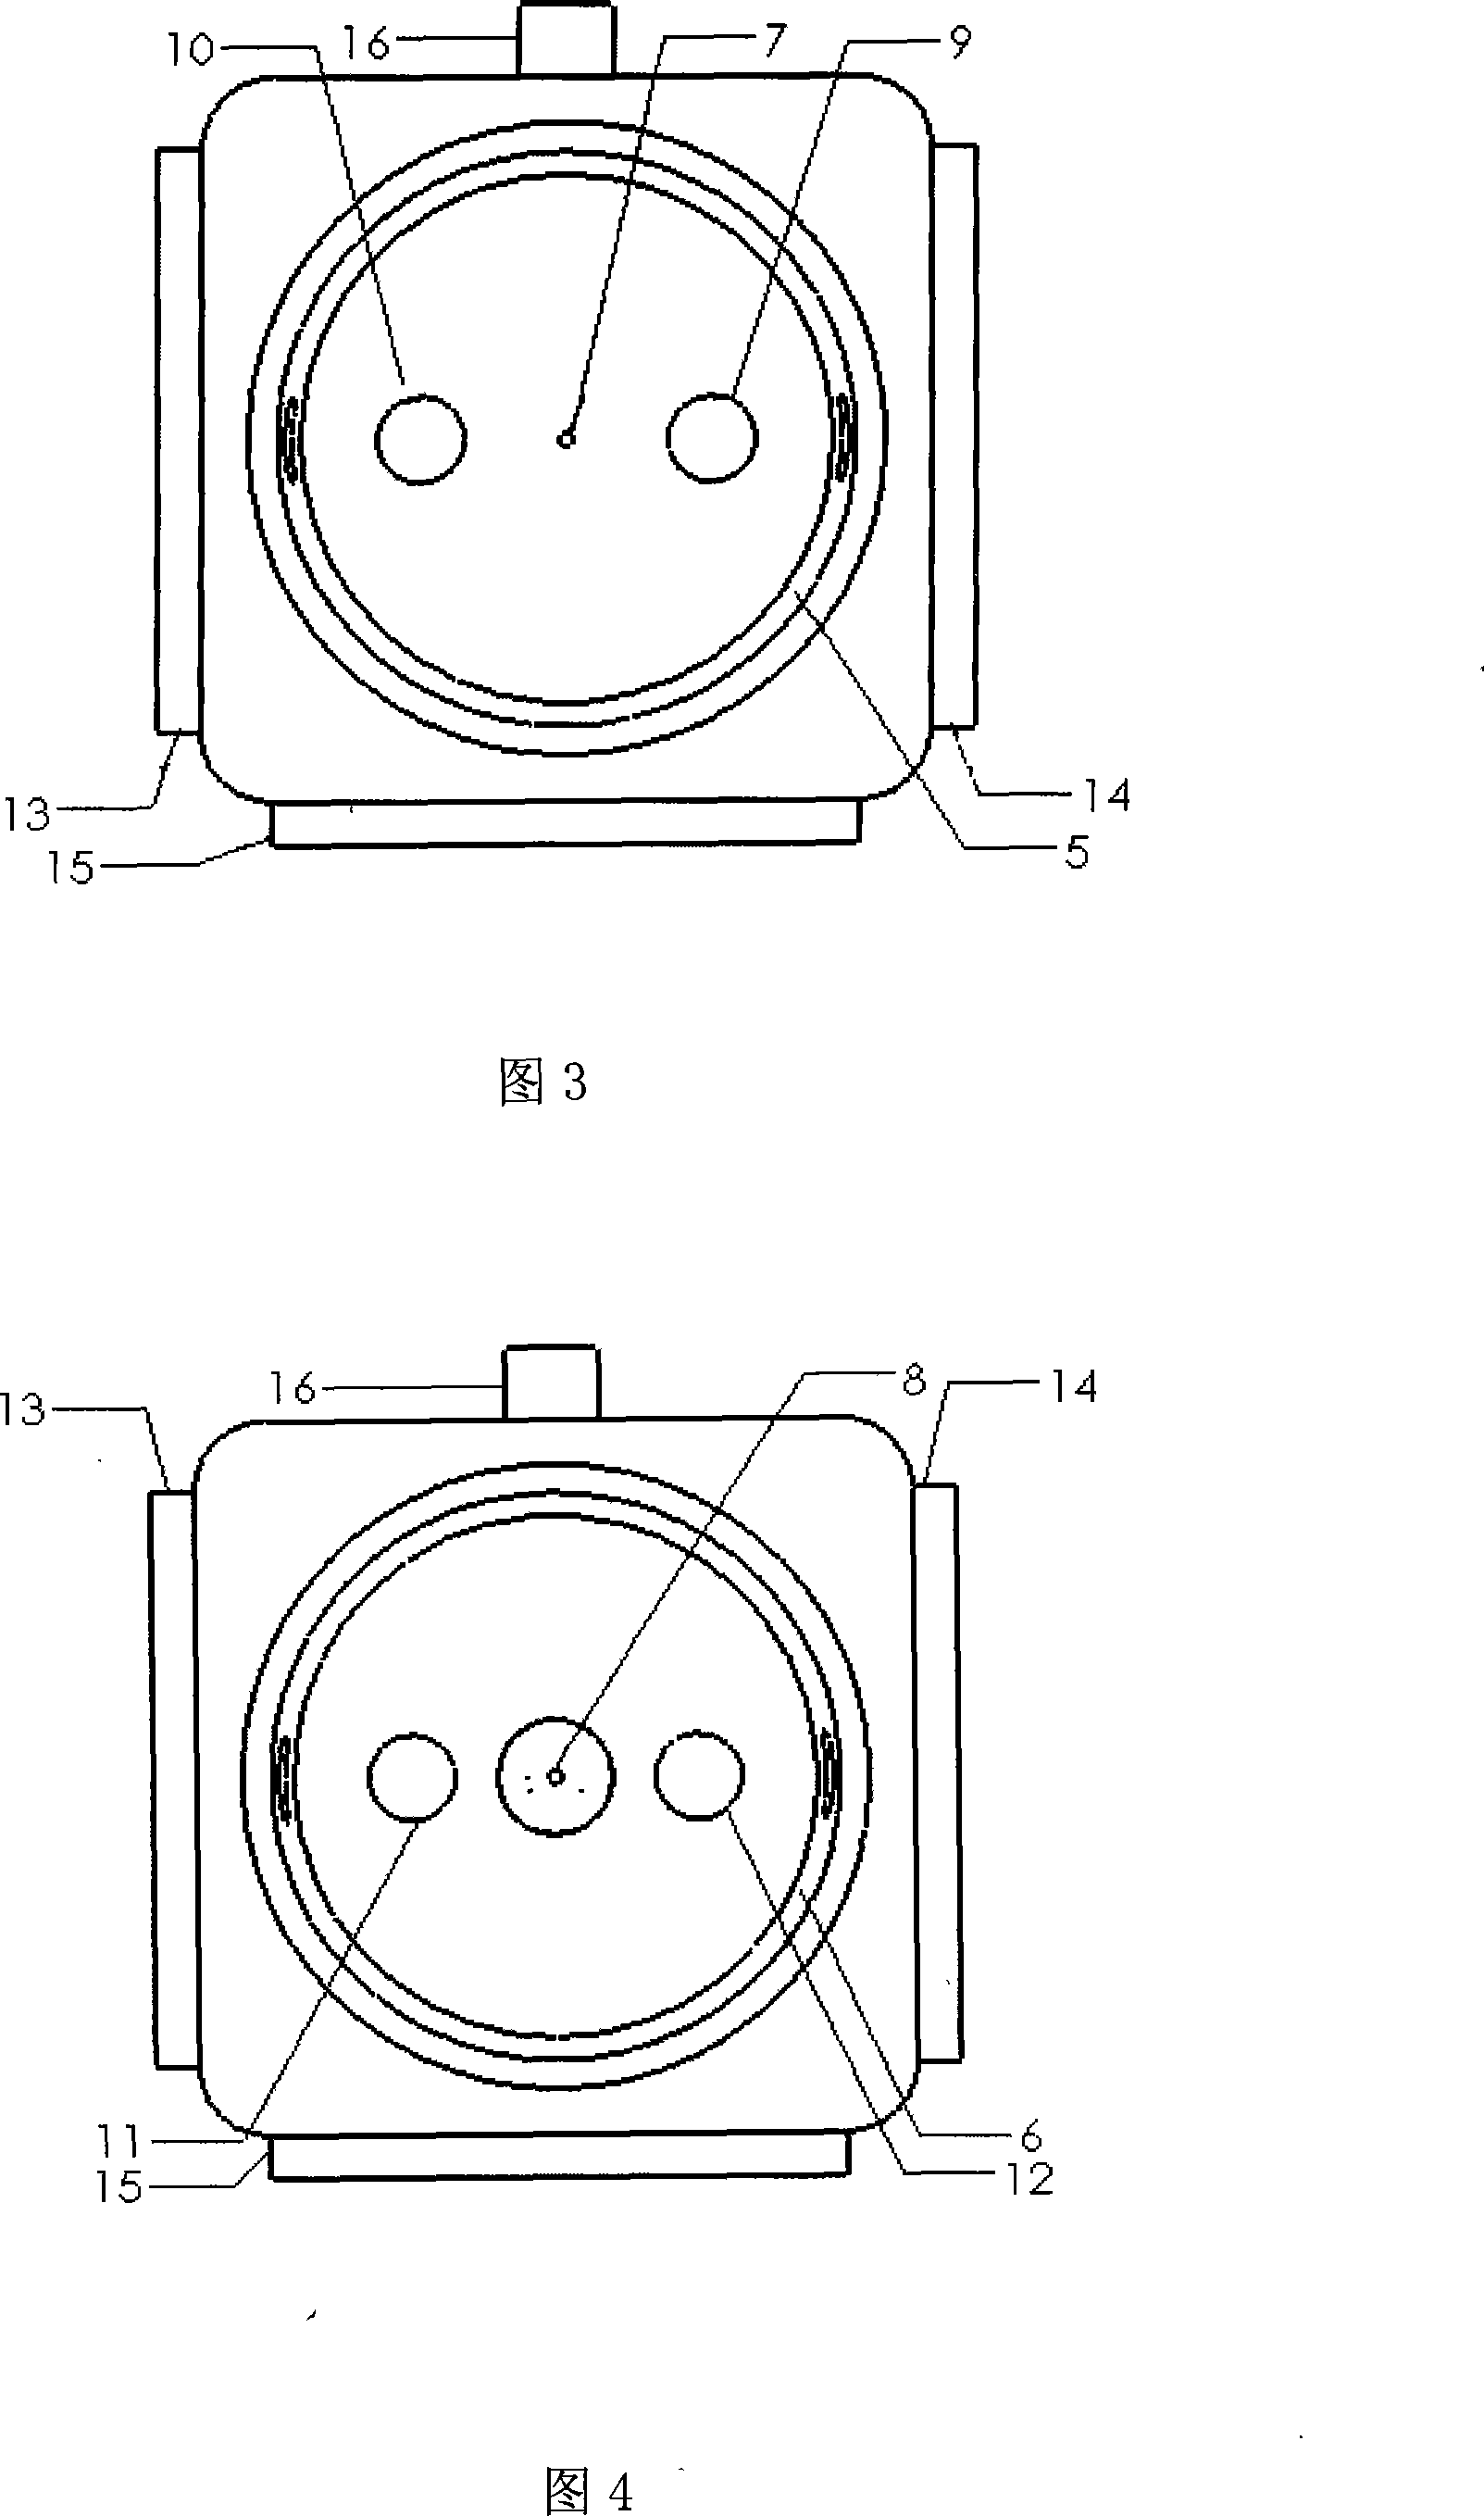 Non-contact tonometery and device